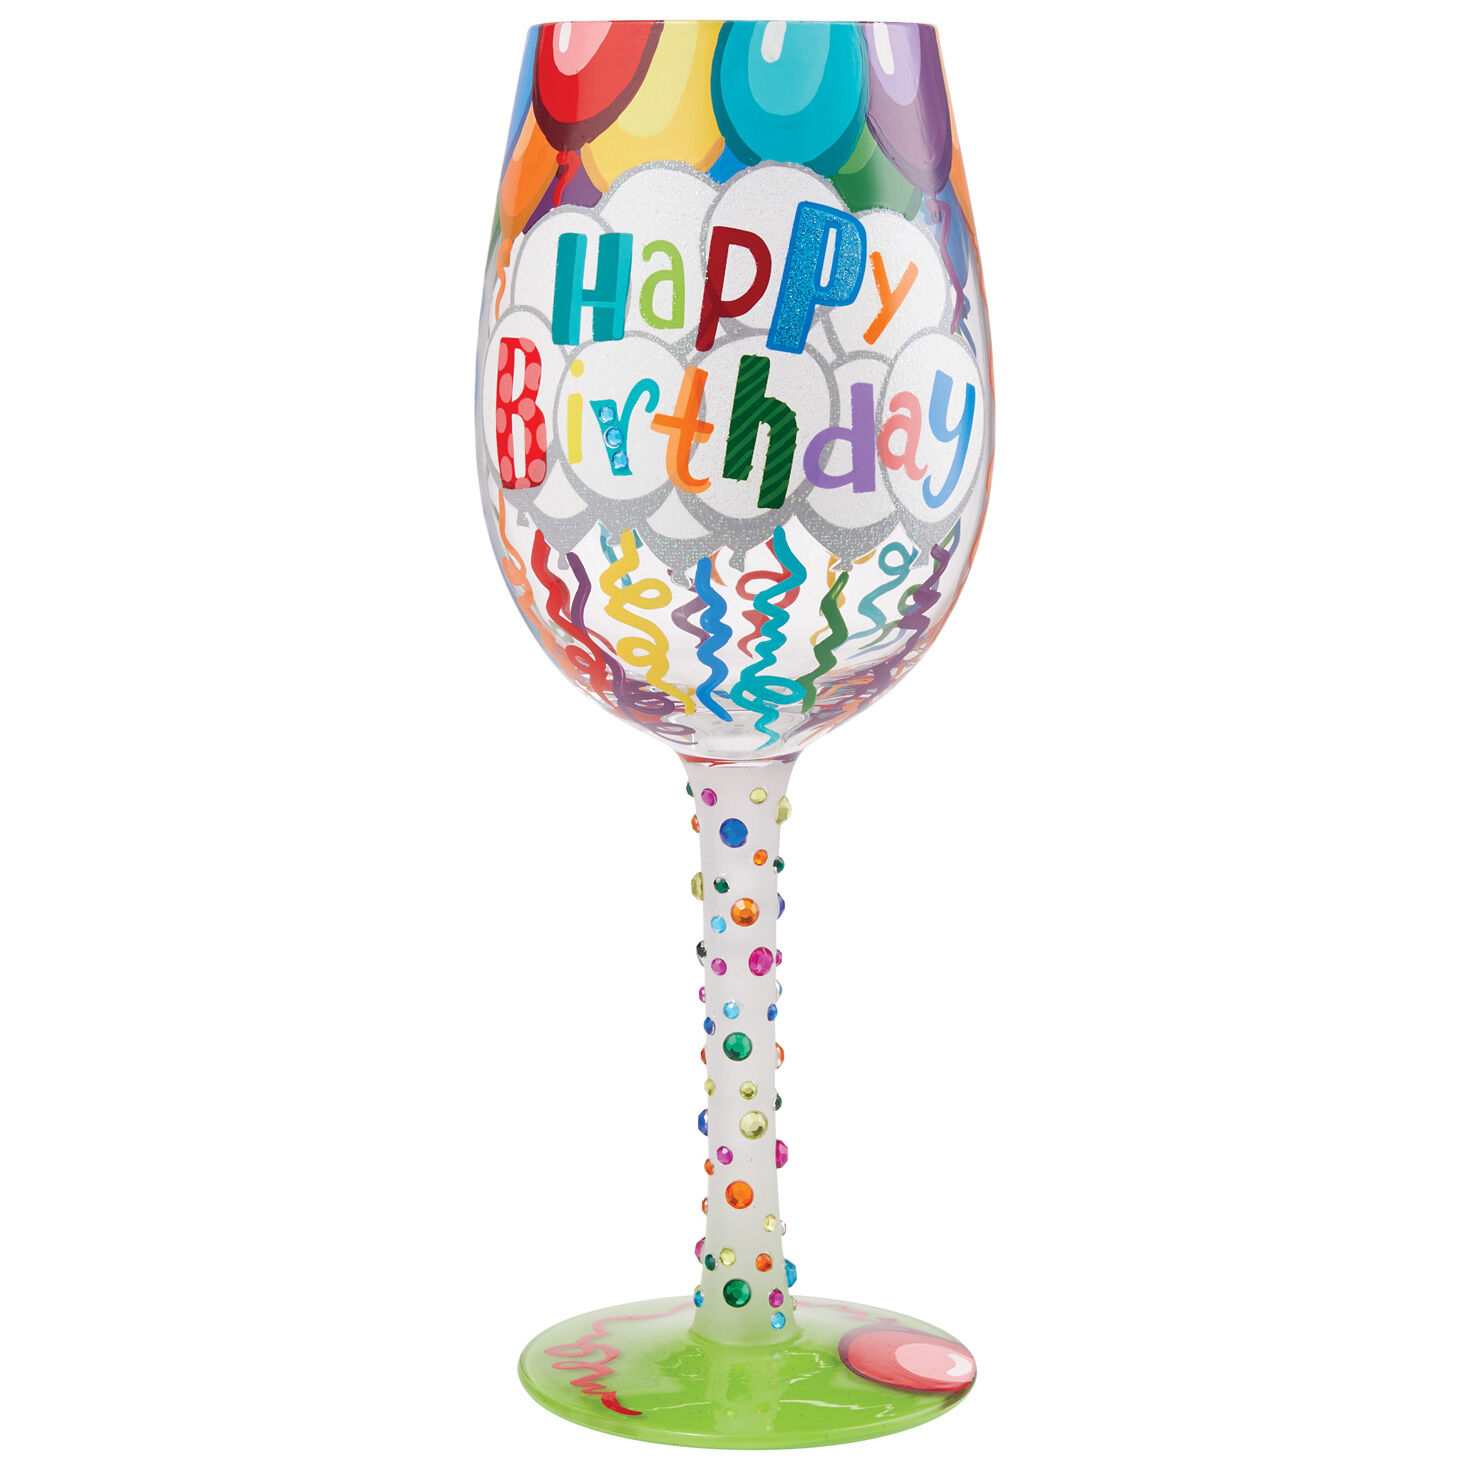 https://www.hallmark.com/dw/image/v2/AALB_PRD/on/demandware.static/-/Sites-hallmark-master/default/dwe5b1fd78/images/finished-goods/products/6009211/Happy-Birthday-Balloons-and-Streamers-Painted-Wine-Glass_6009211_01.jpg?sfrm=jpg